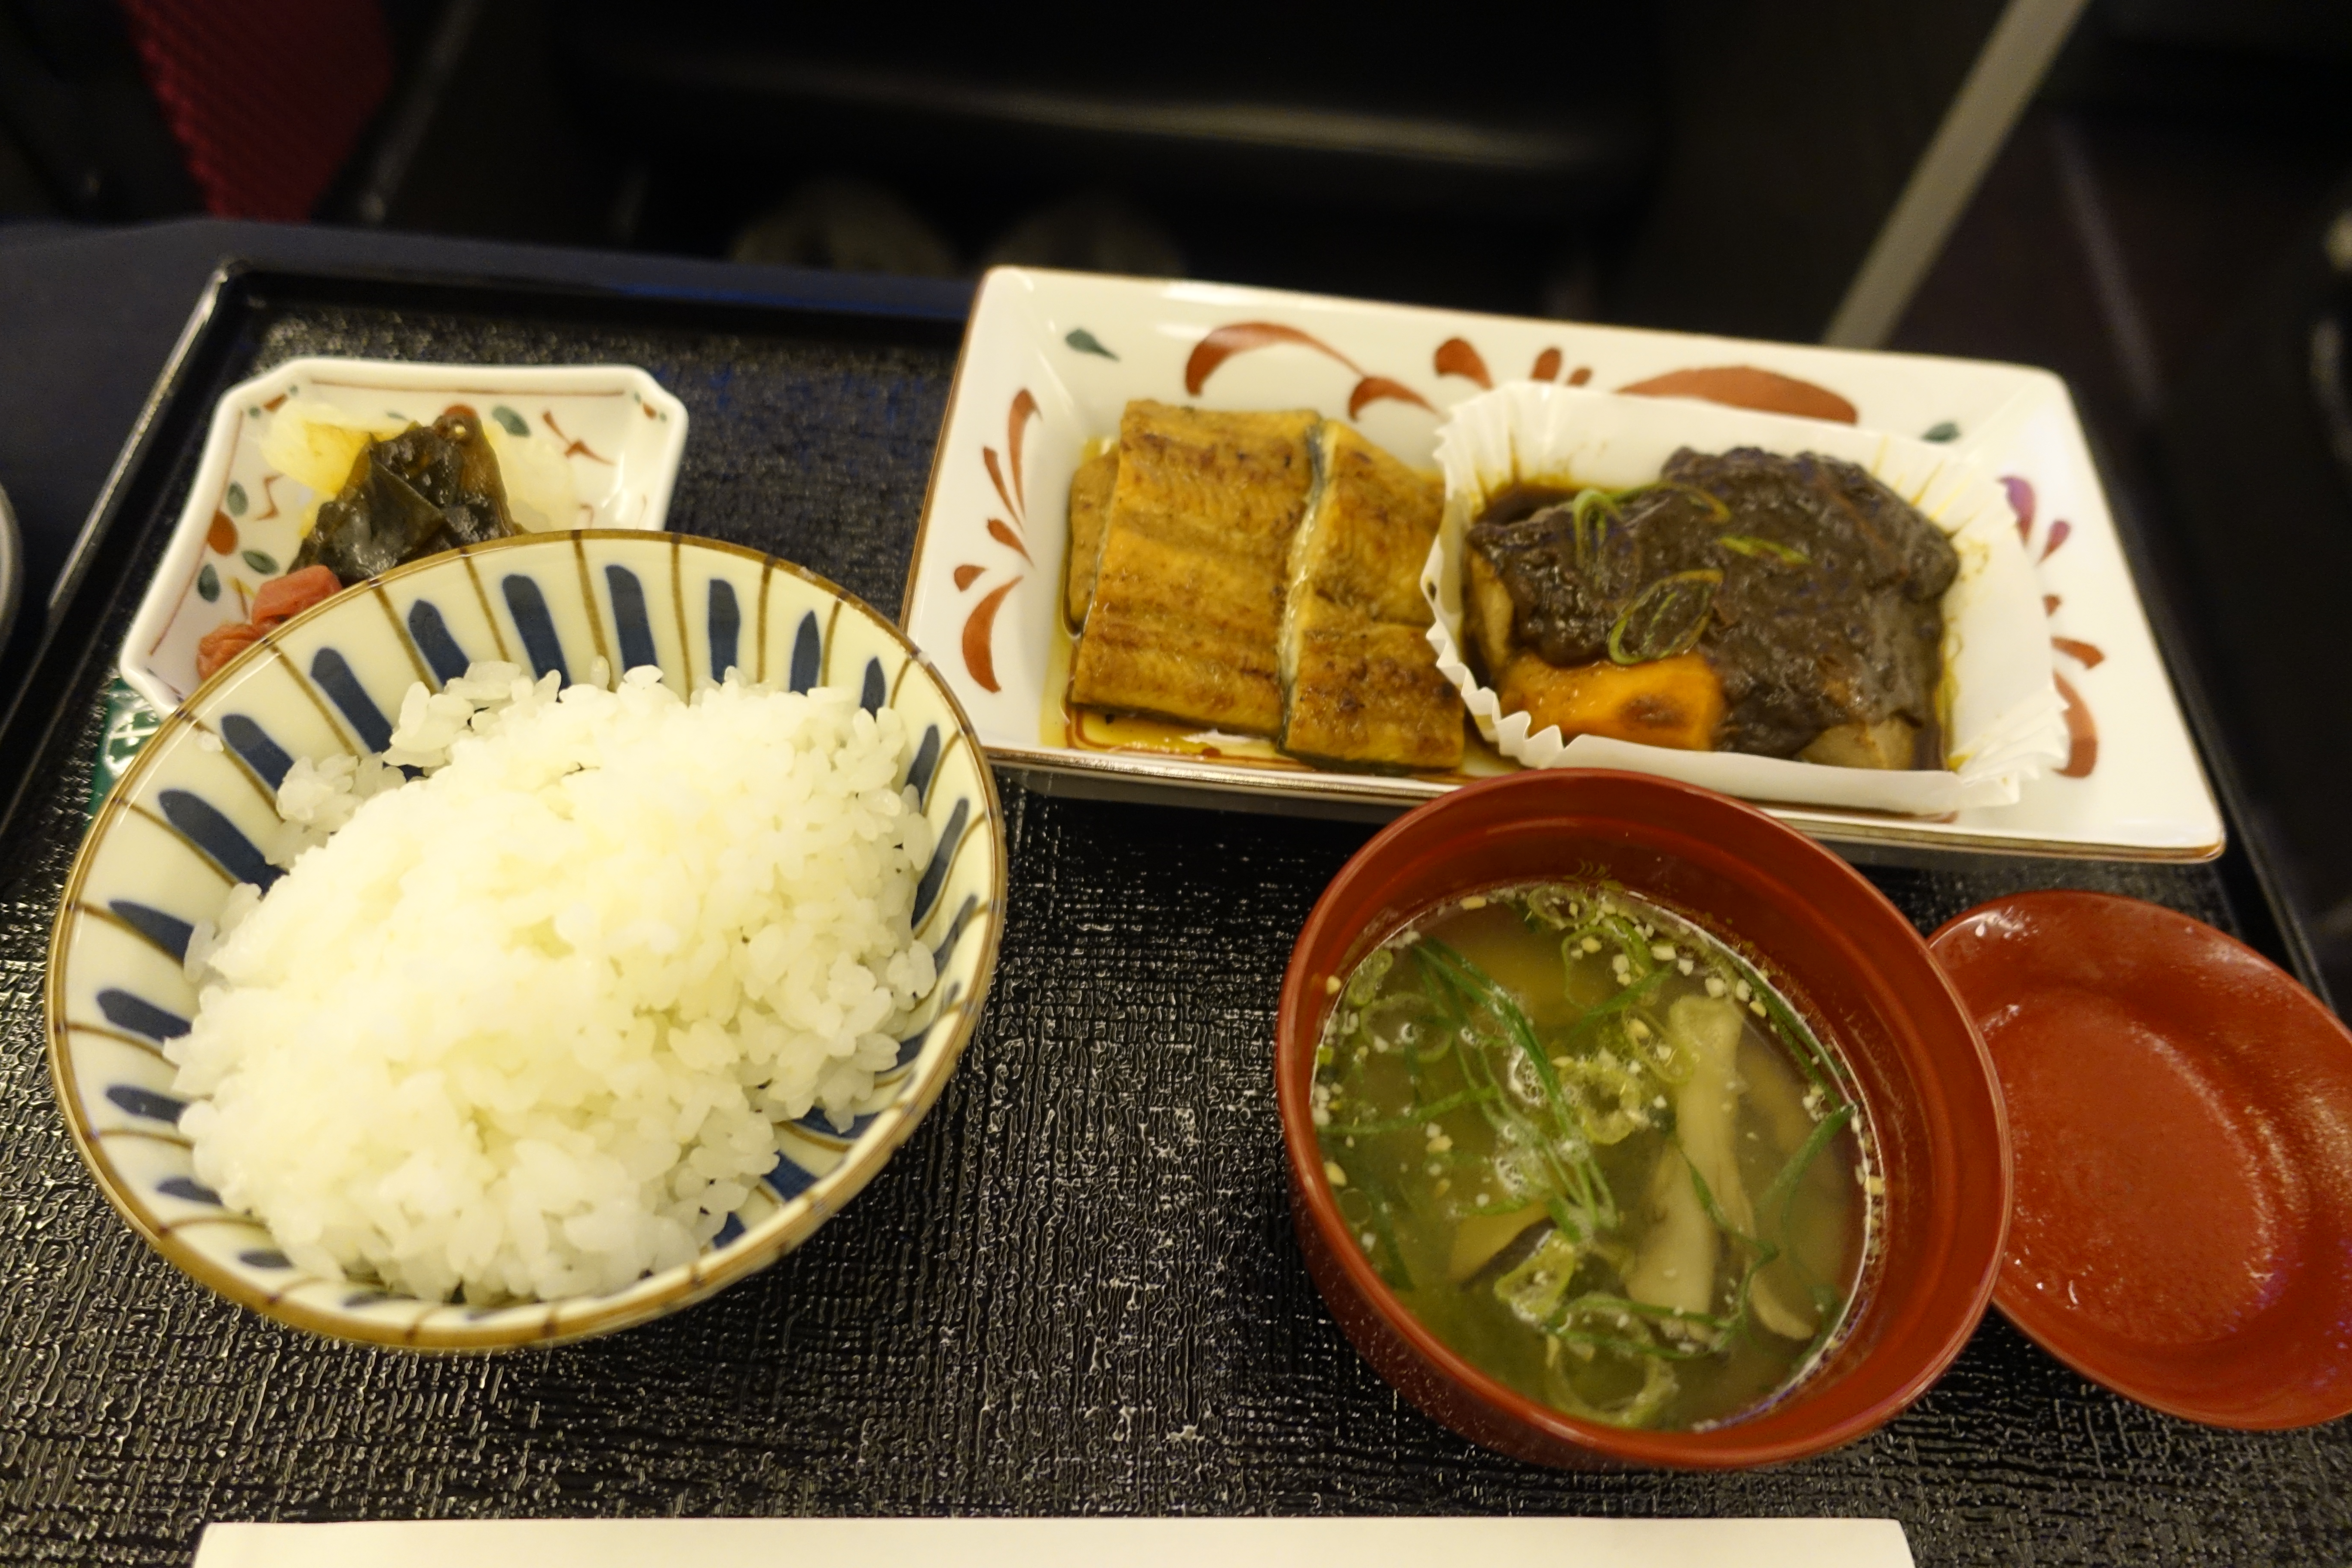 The main entry was eel and rice, at least it was warm.